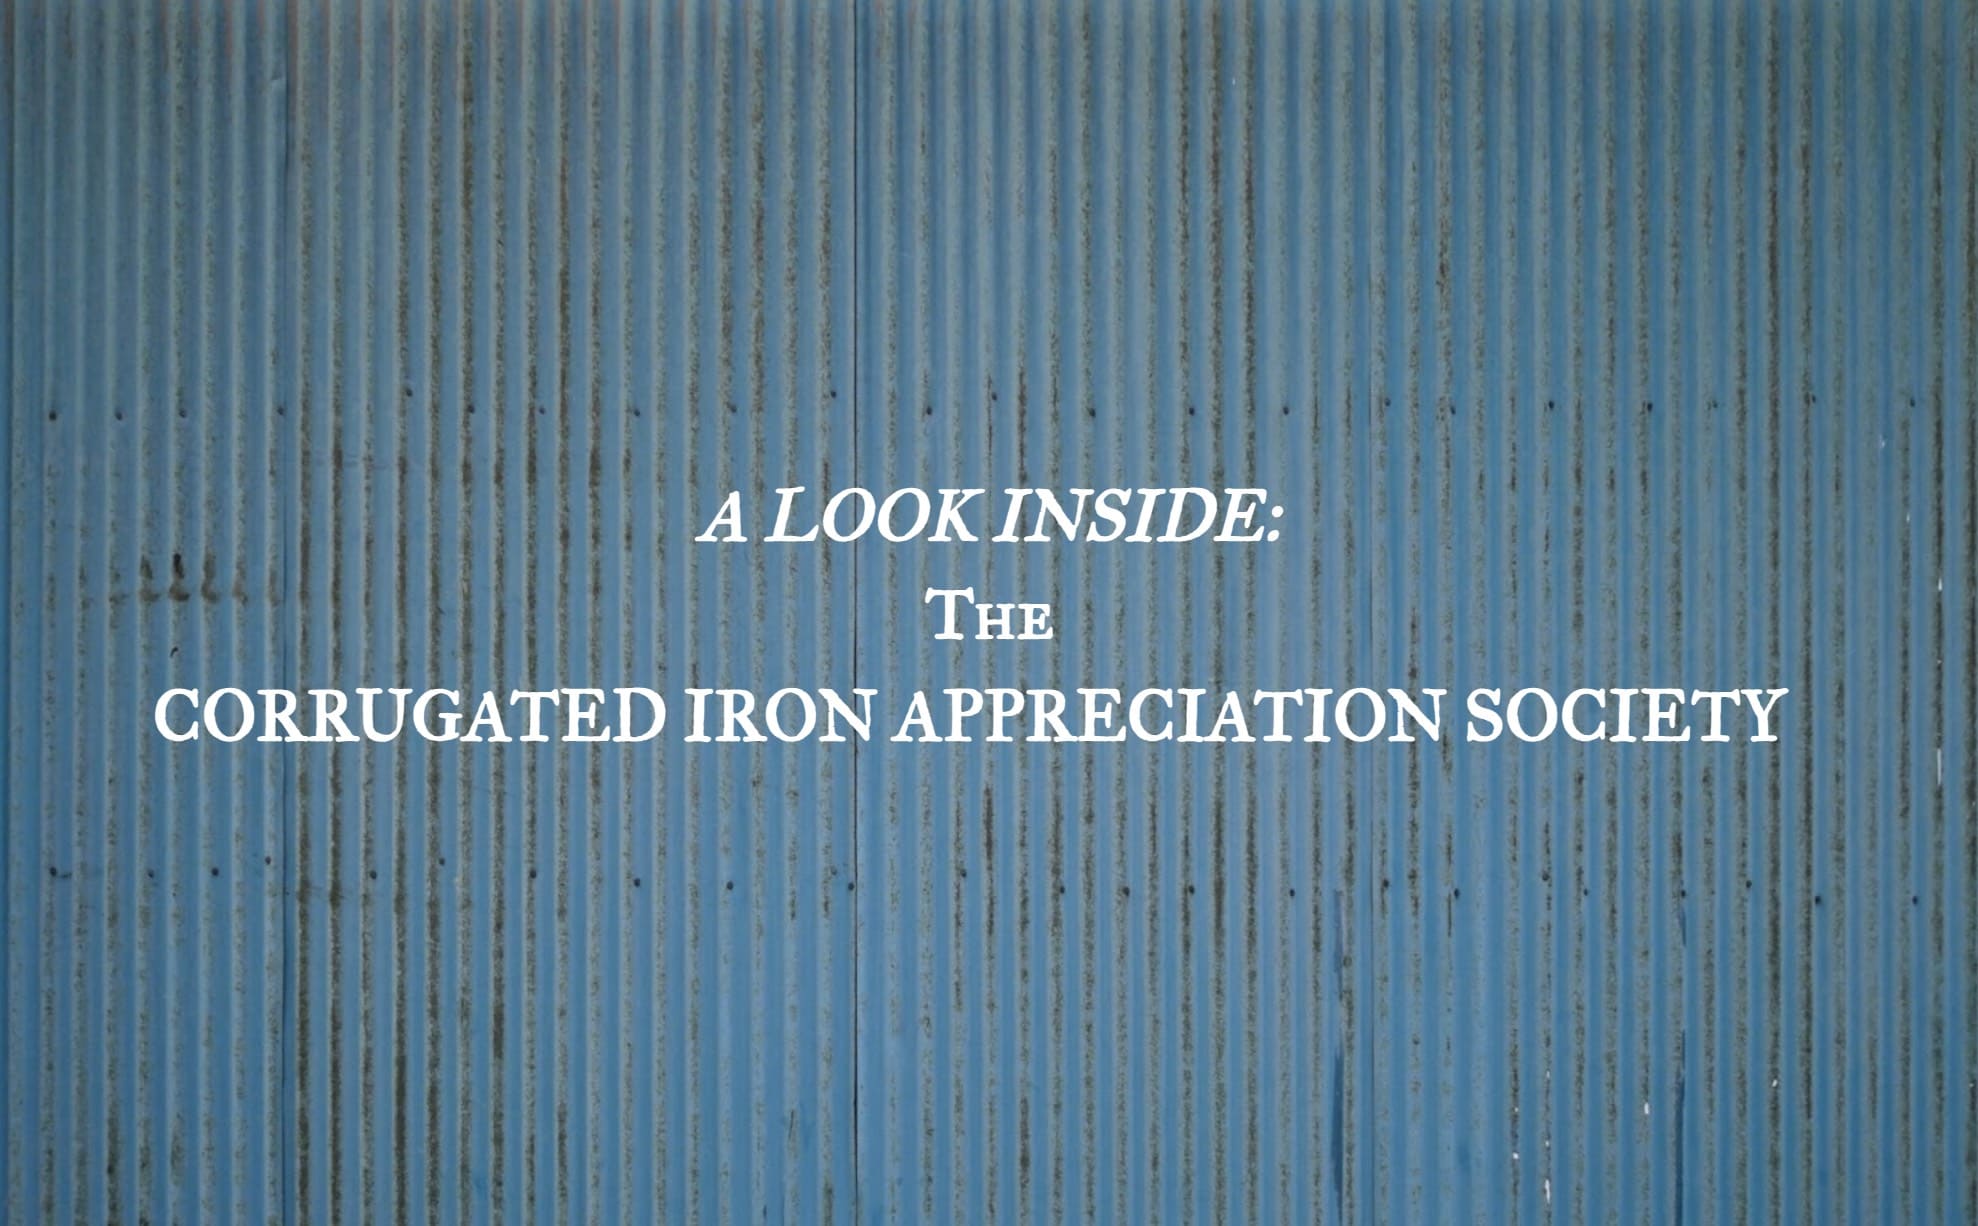 A look inside: the corrugated iron appreciation society